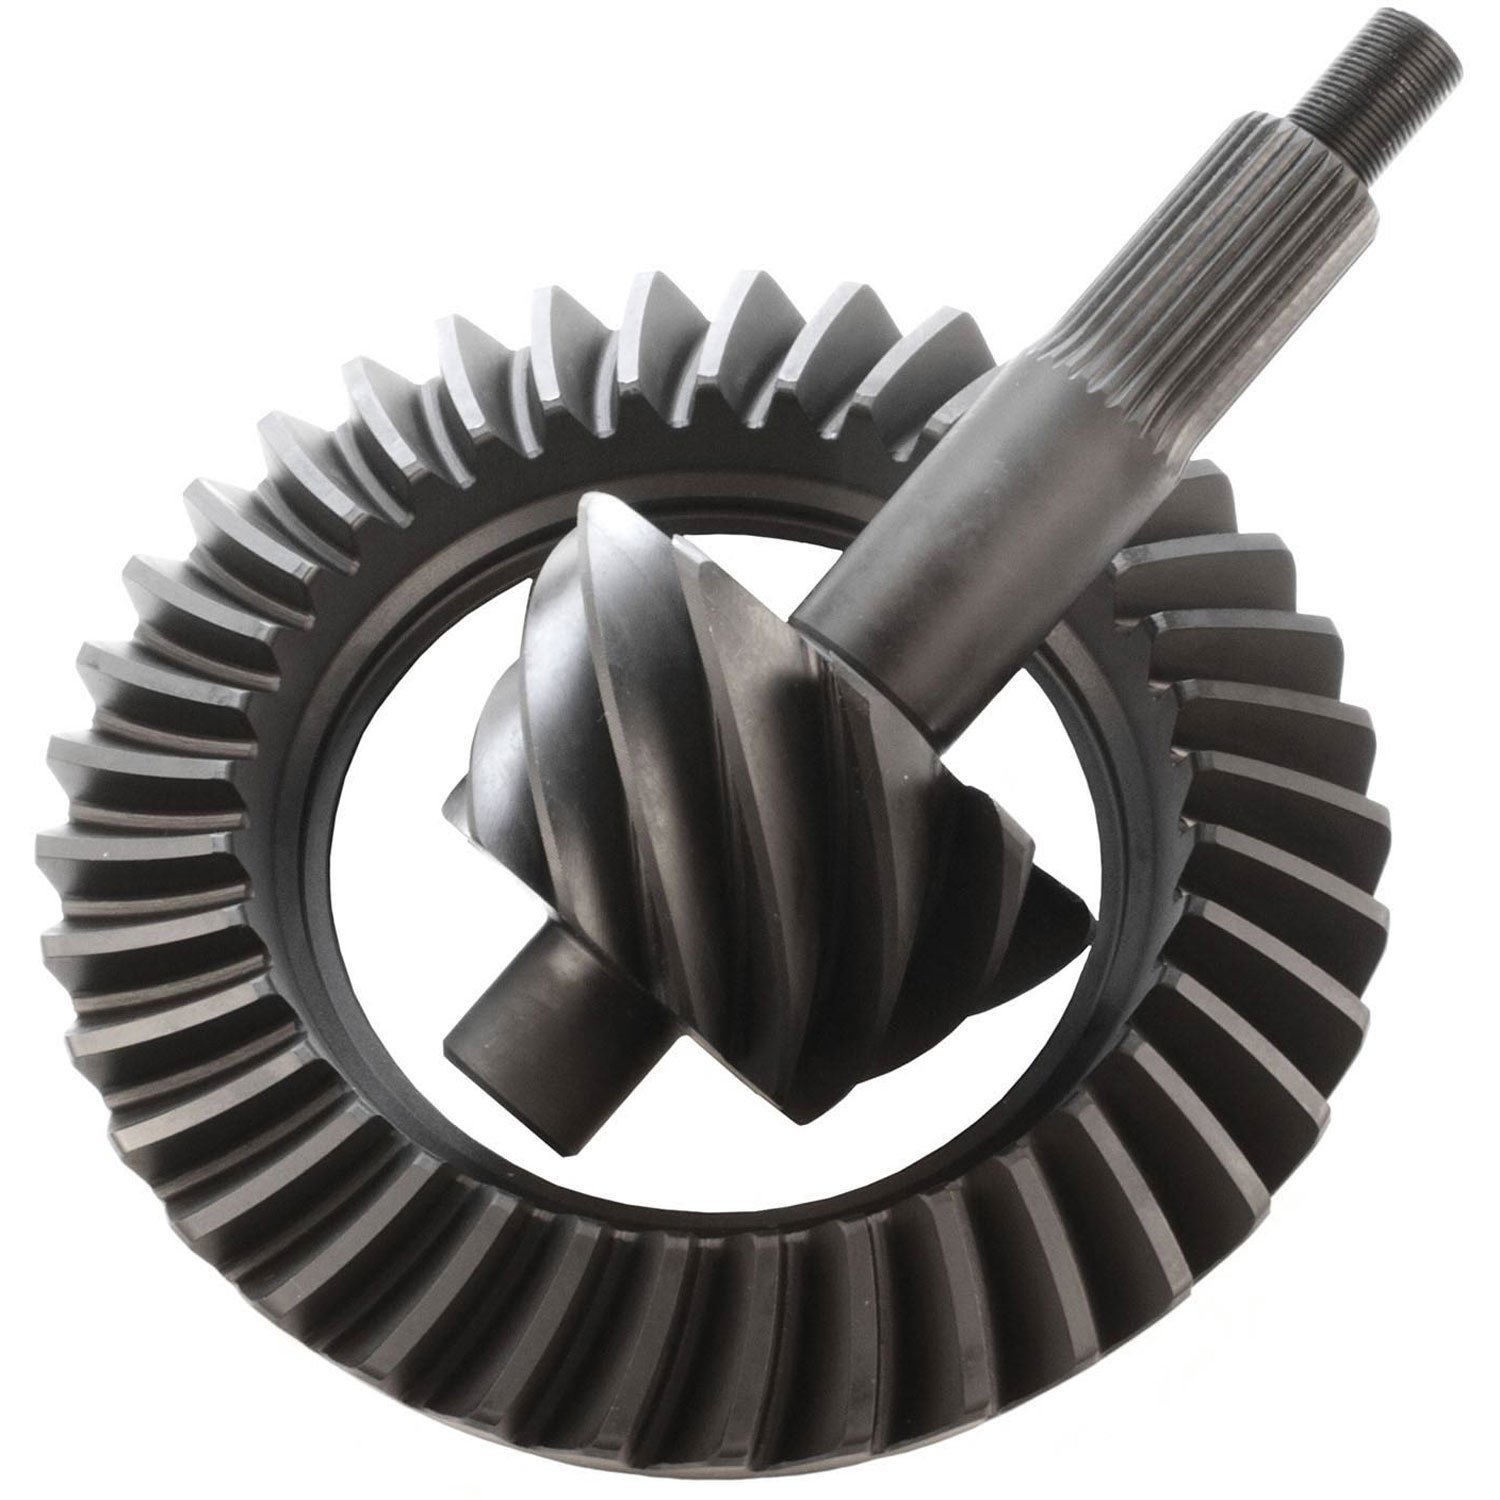 Ford Ring & Pinion Gear Set Ratio: 5.14